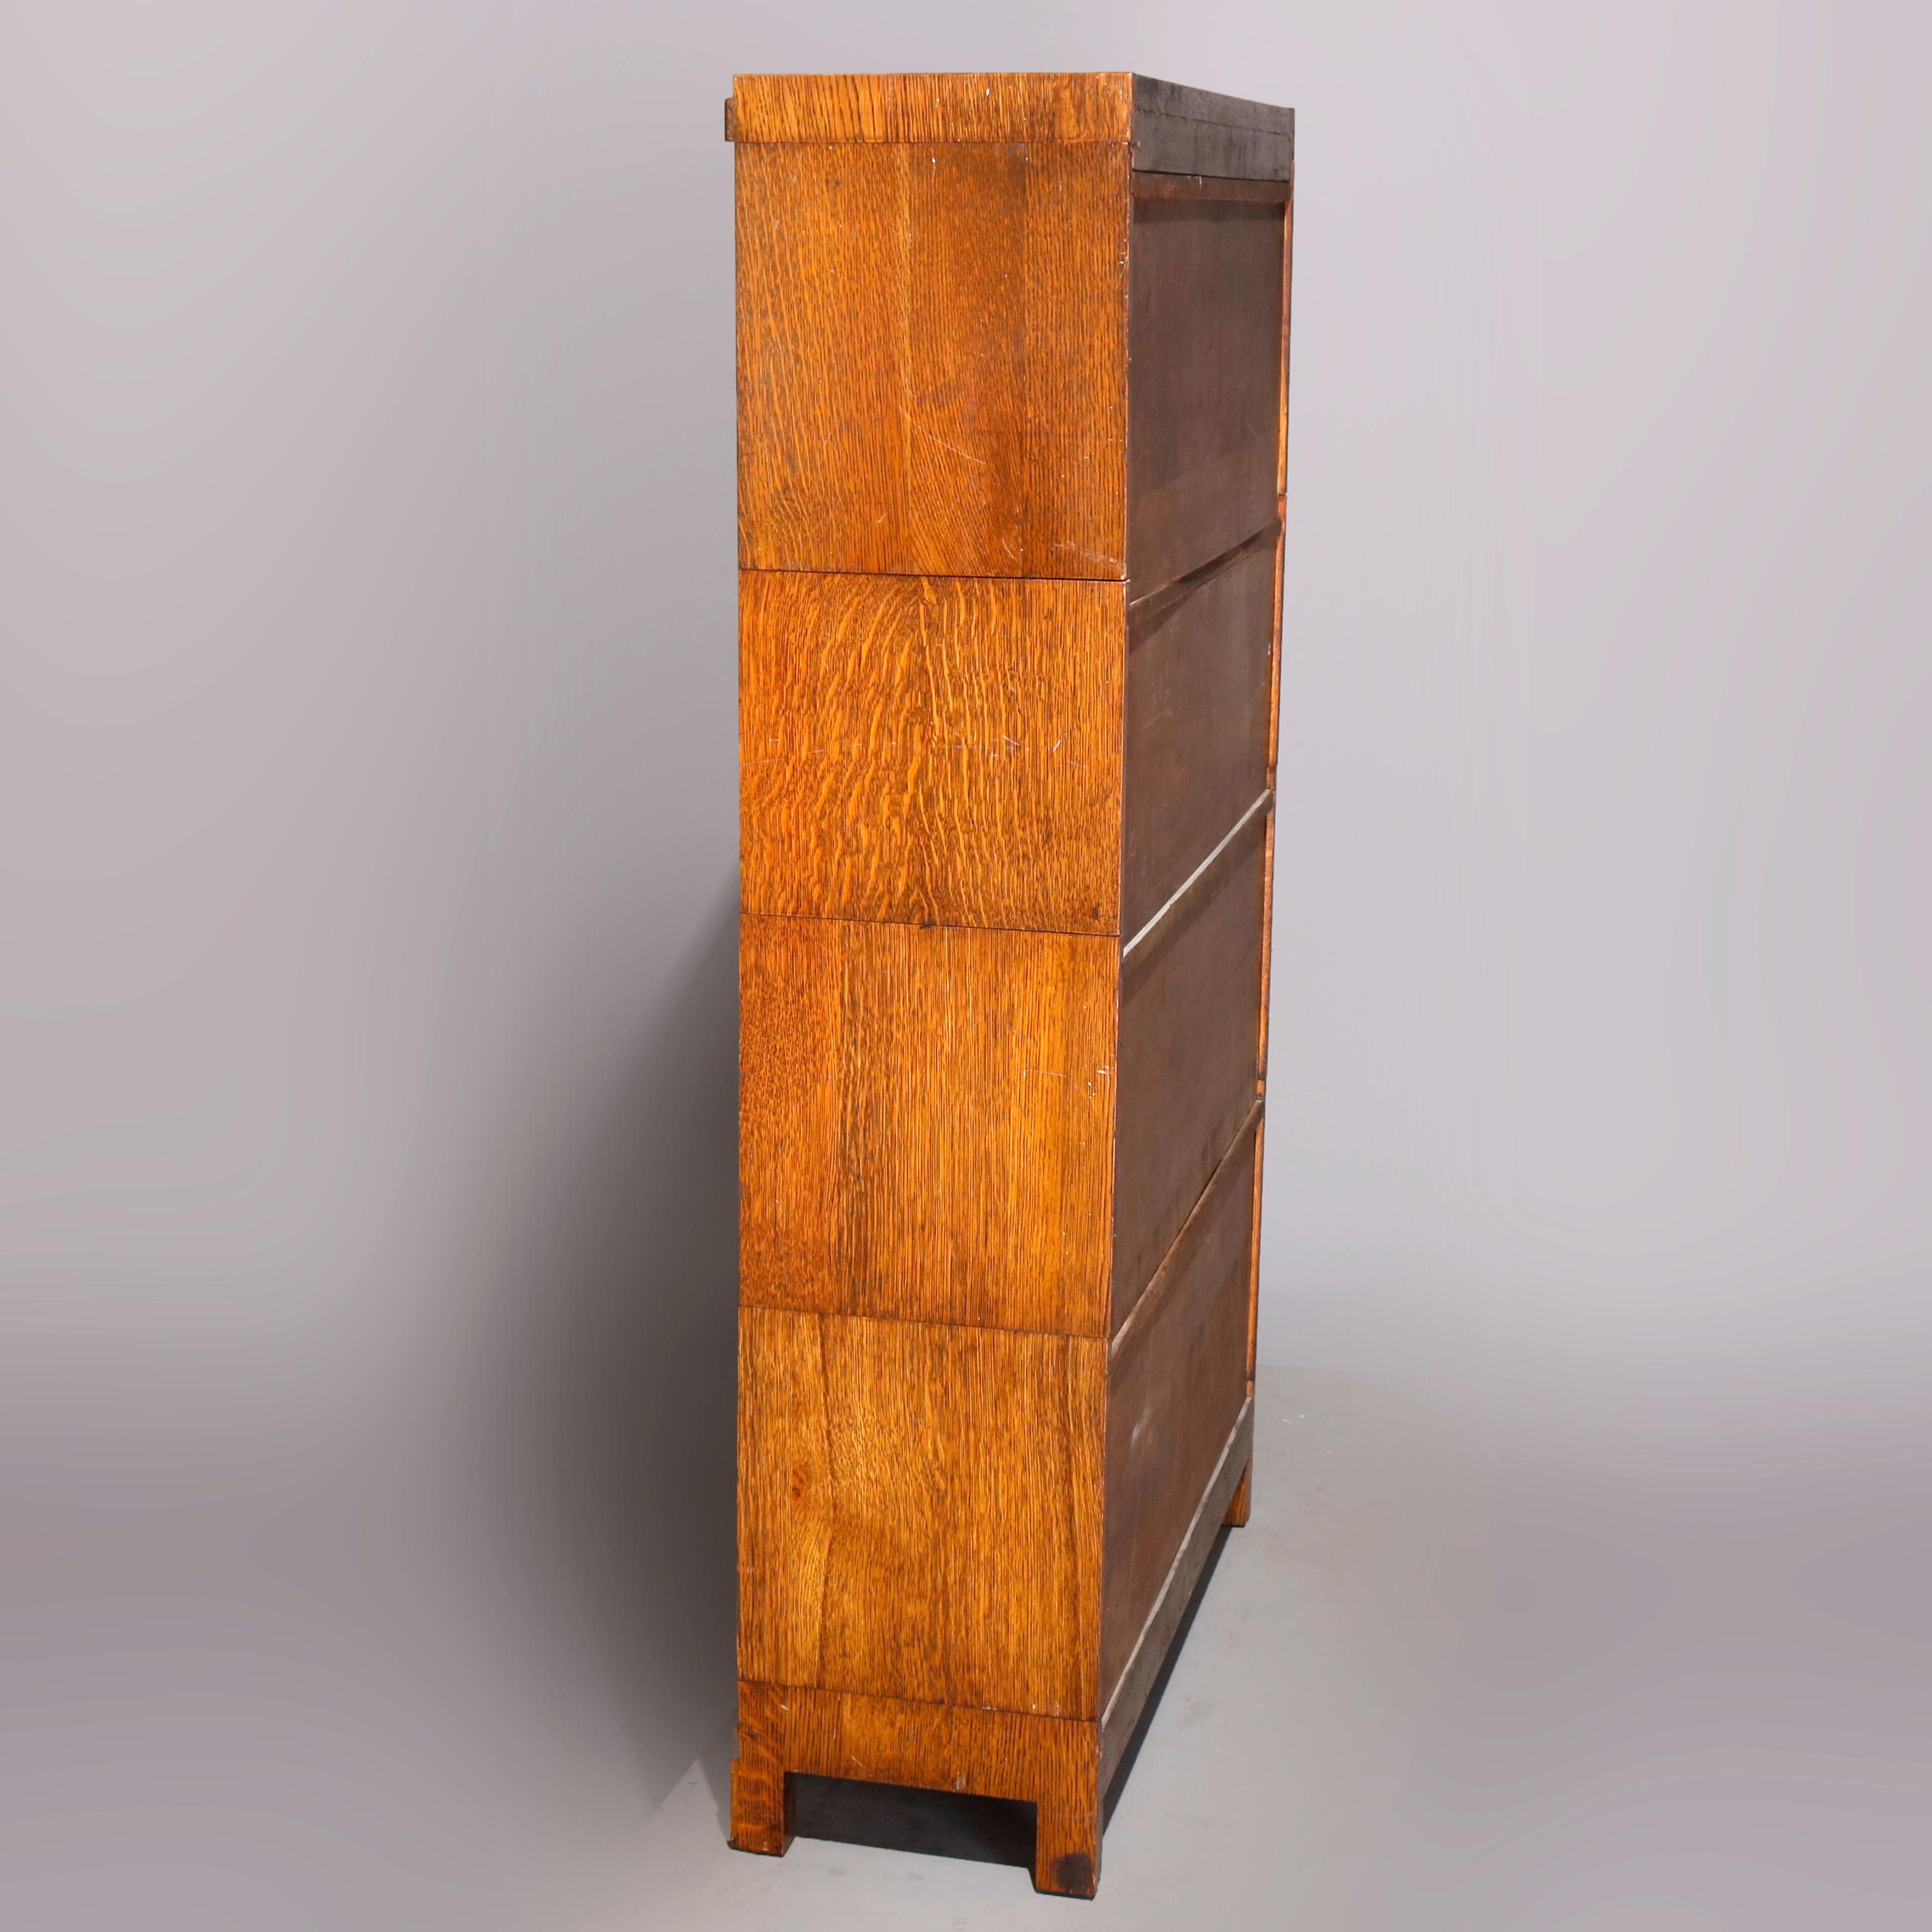 An Arts & Crafts sectional Barrister bookcase in the manner of Globe-Wernicke offers quarter sawn oak construction with four stacks having a pull-down glass door surmounted by removable crown and raised on square and straight legs, circa